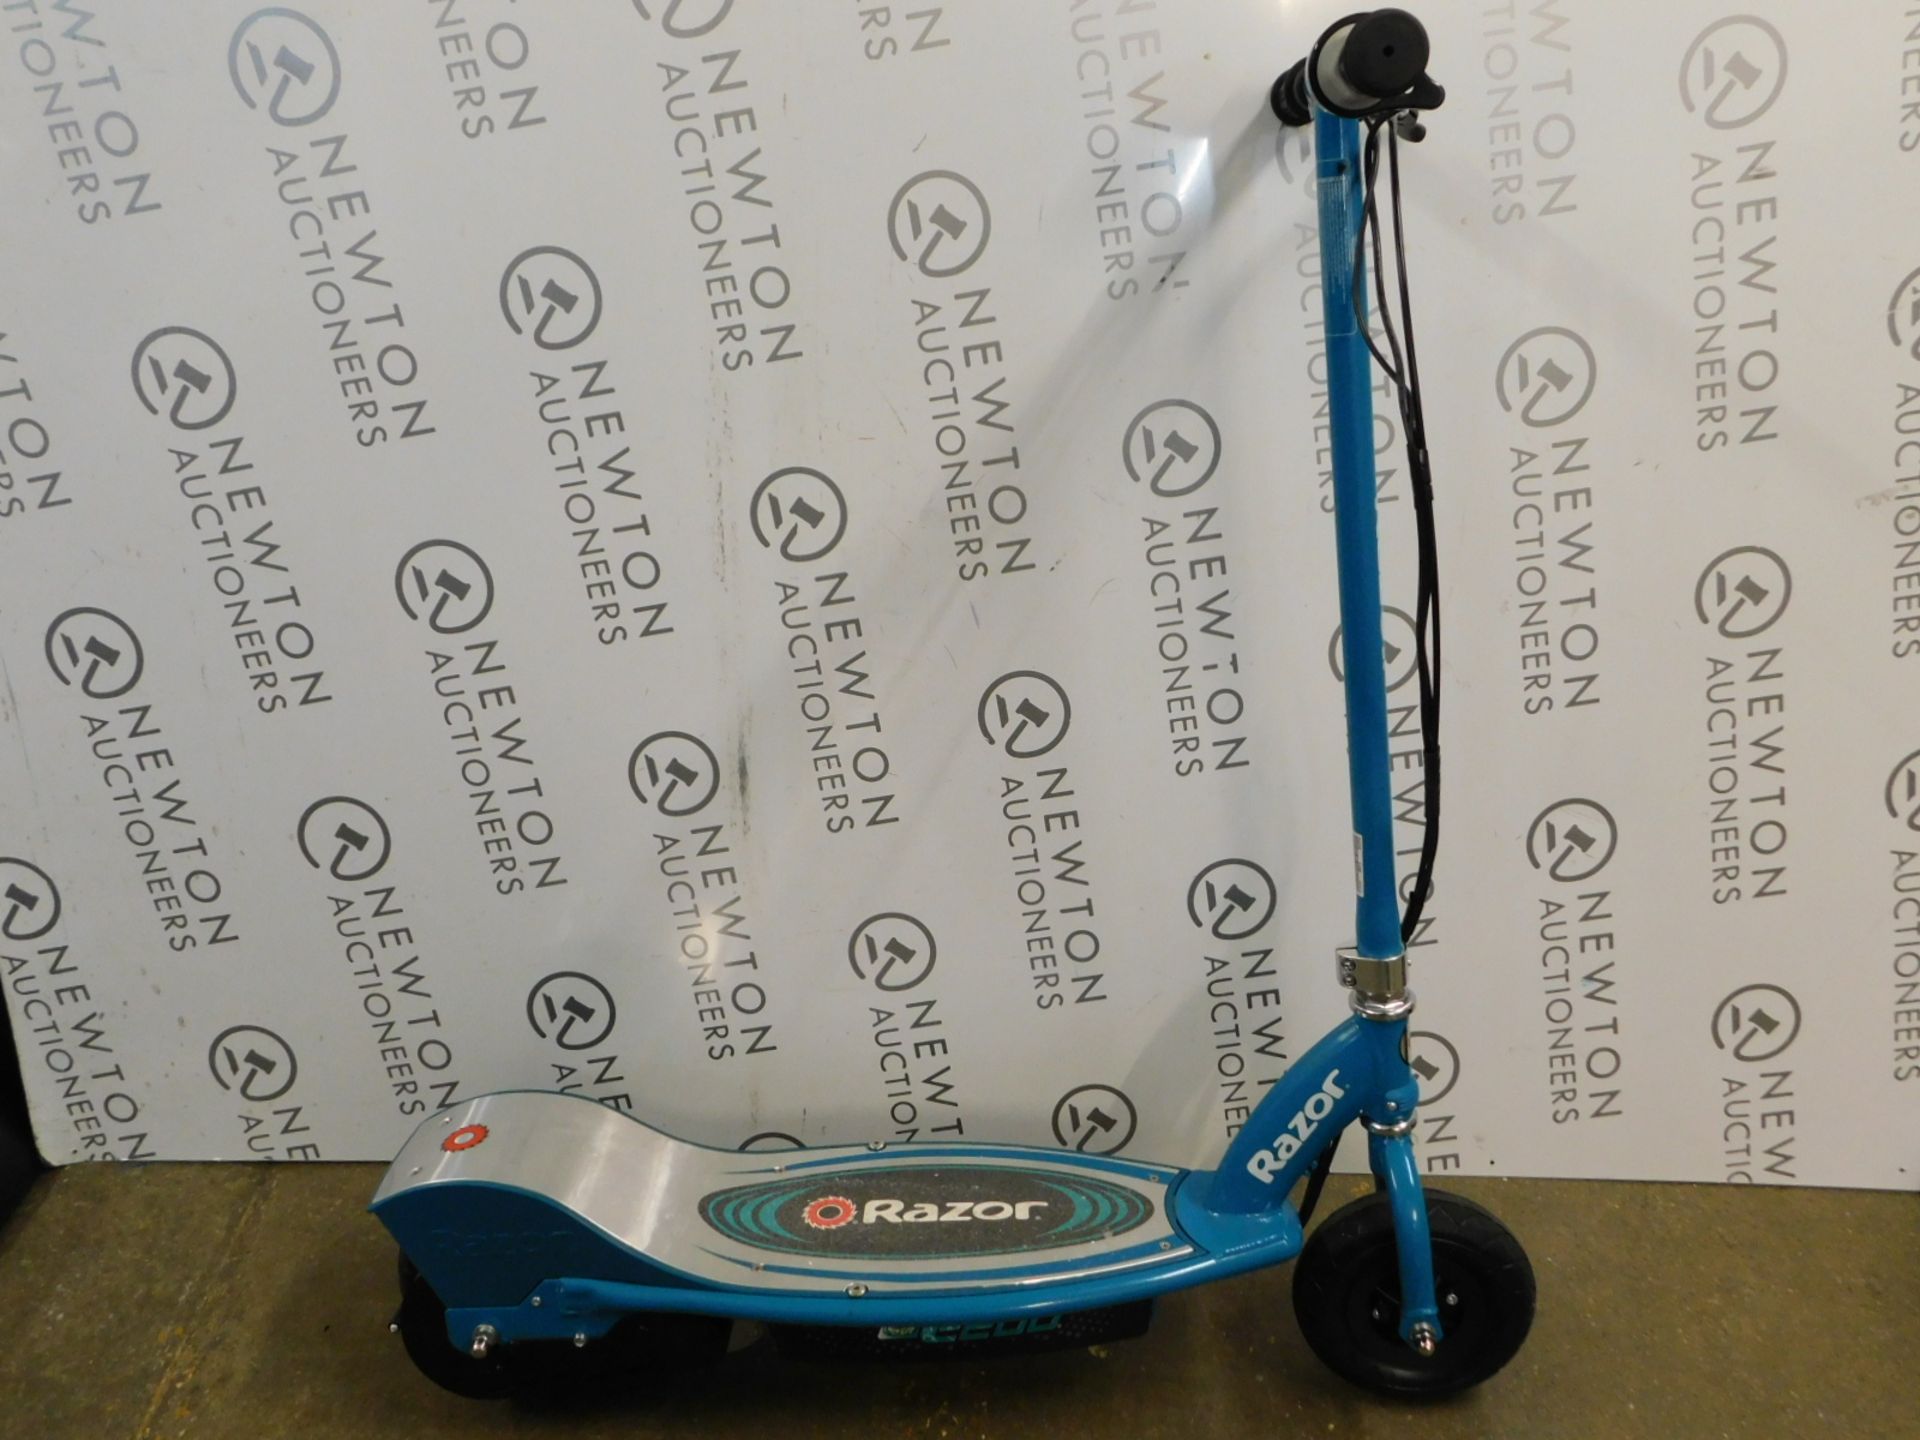 1 RAZOR POWER CORE E200 BLUE ELECTRIC SCOOTER WITH CHARGER RRP Â£239.99